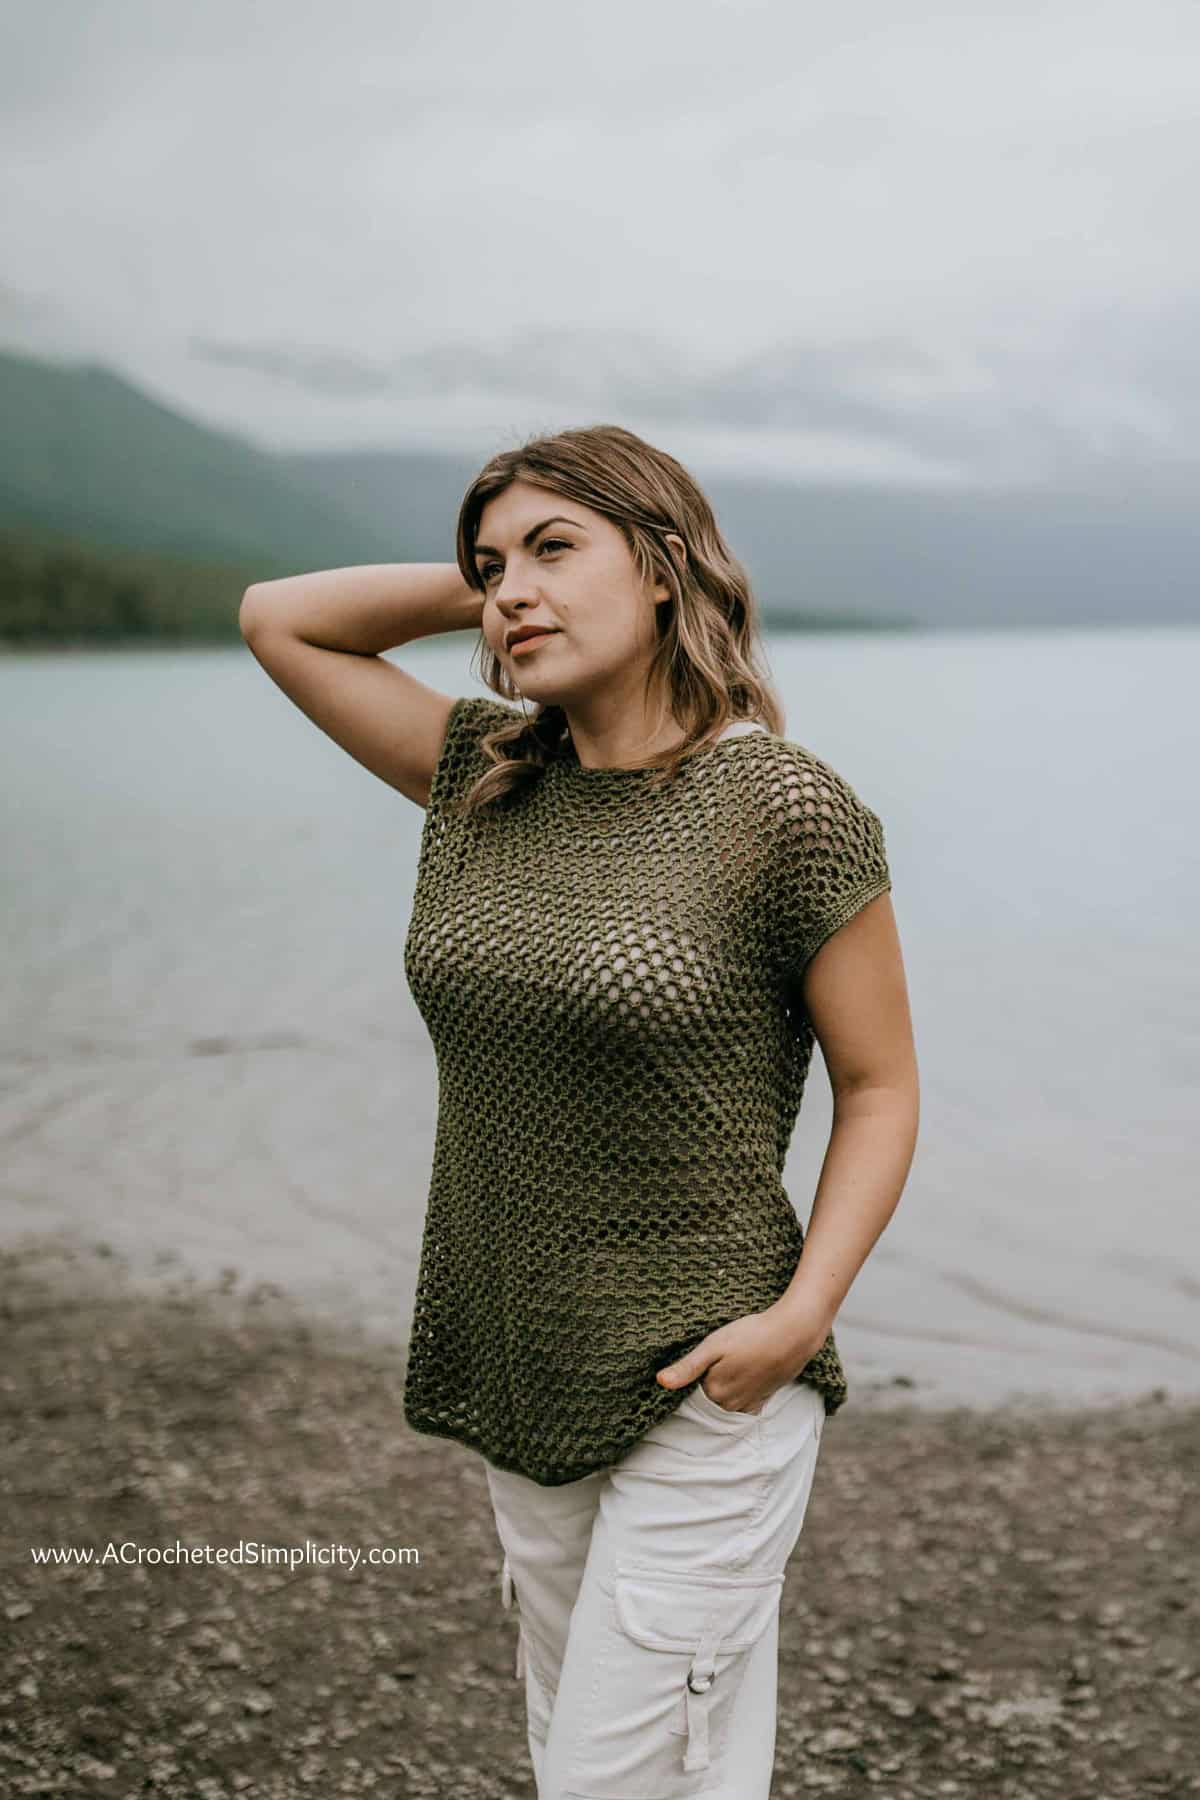 Woman modeling an olive crochet mesh top with mountains in the background.